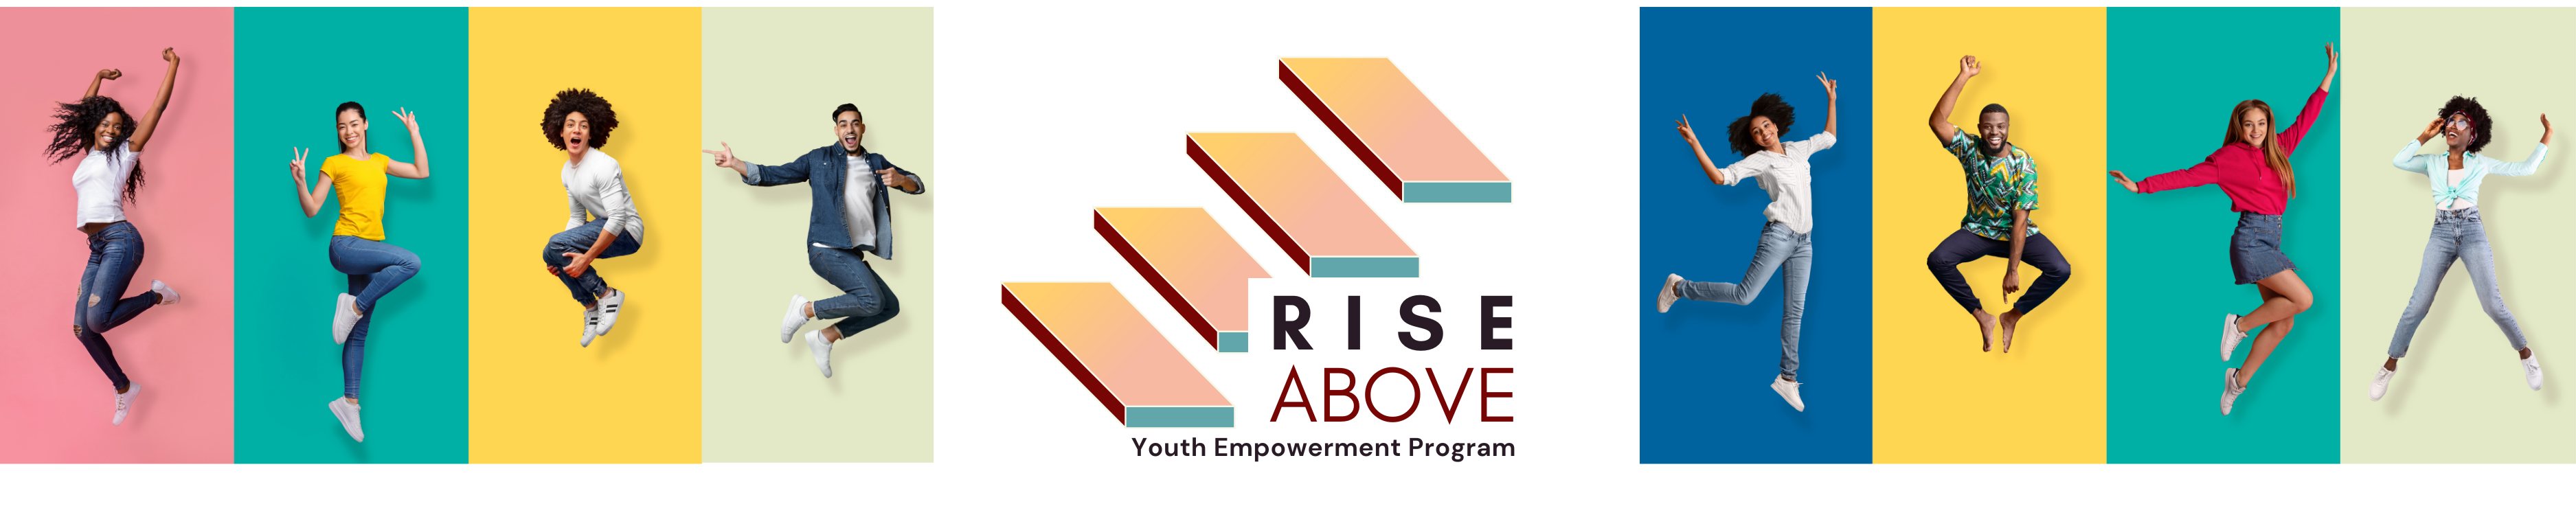 Rise Above Youth Empowerment Program